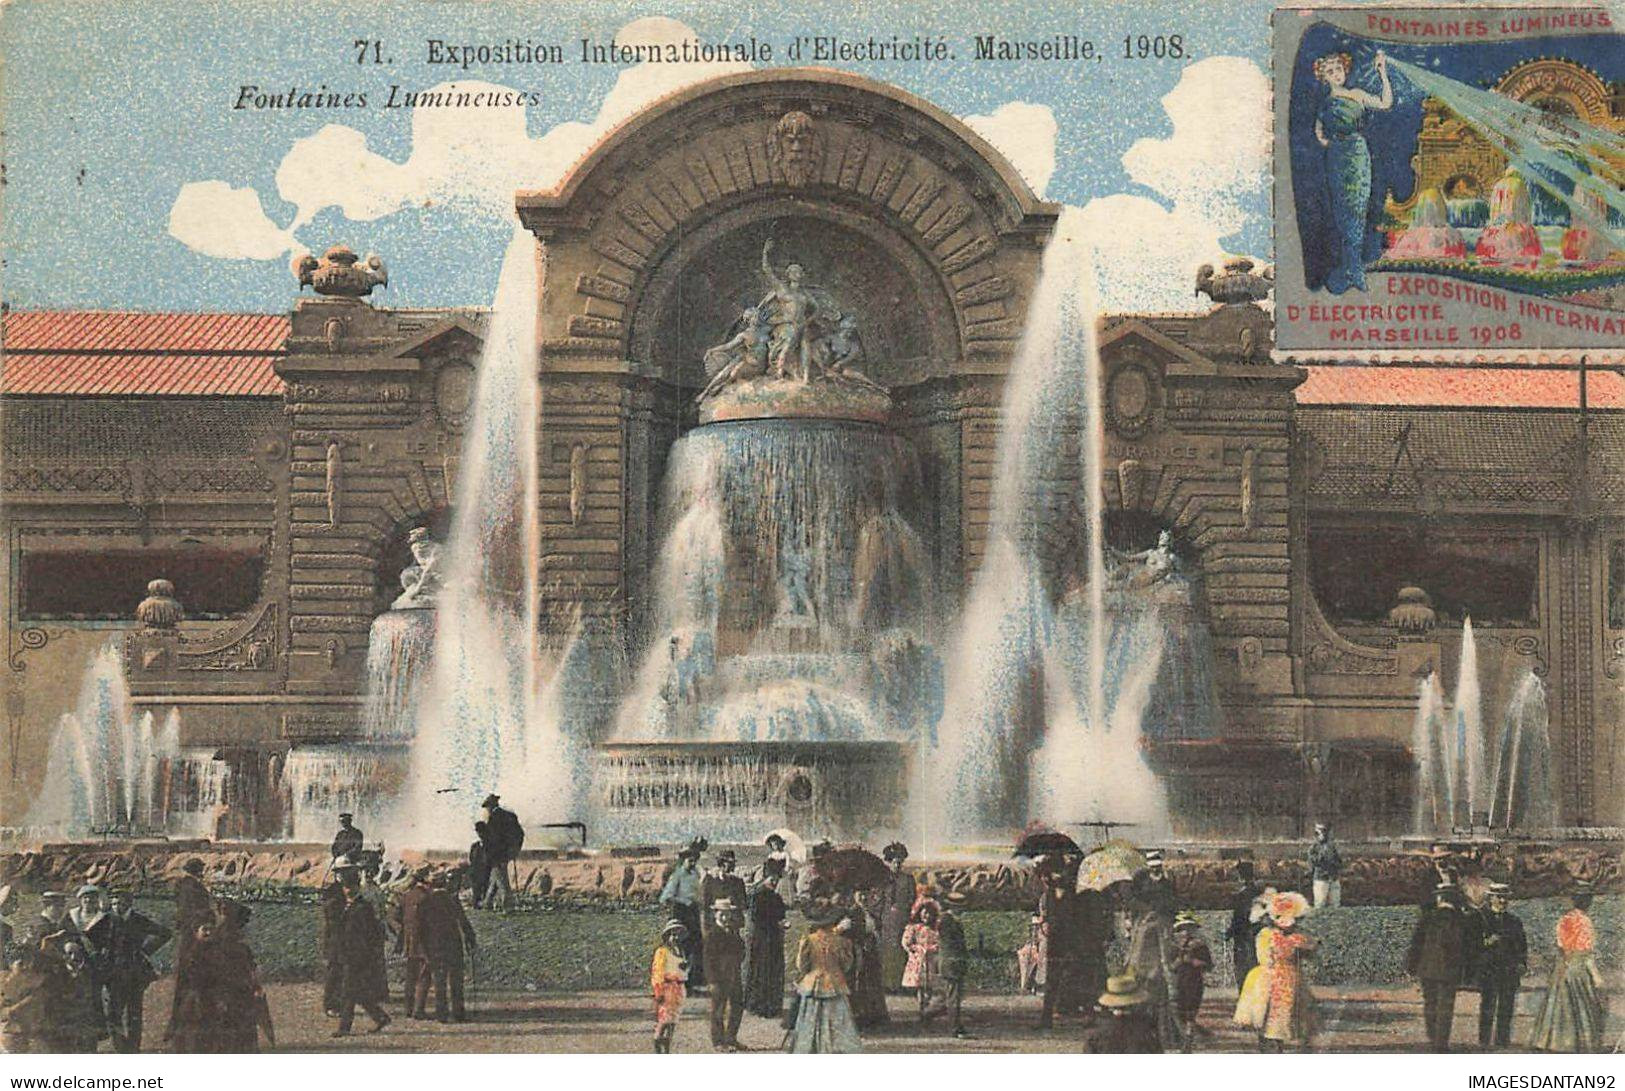 13 MARSEILLE #MK52097 EXPOSITION INTERNATIONALE D ELECTRICITE FONTAINES LUMINEUSES 1908 CACHET + VIGNETTE - Electrical Trade Shows And Other